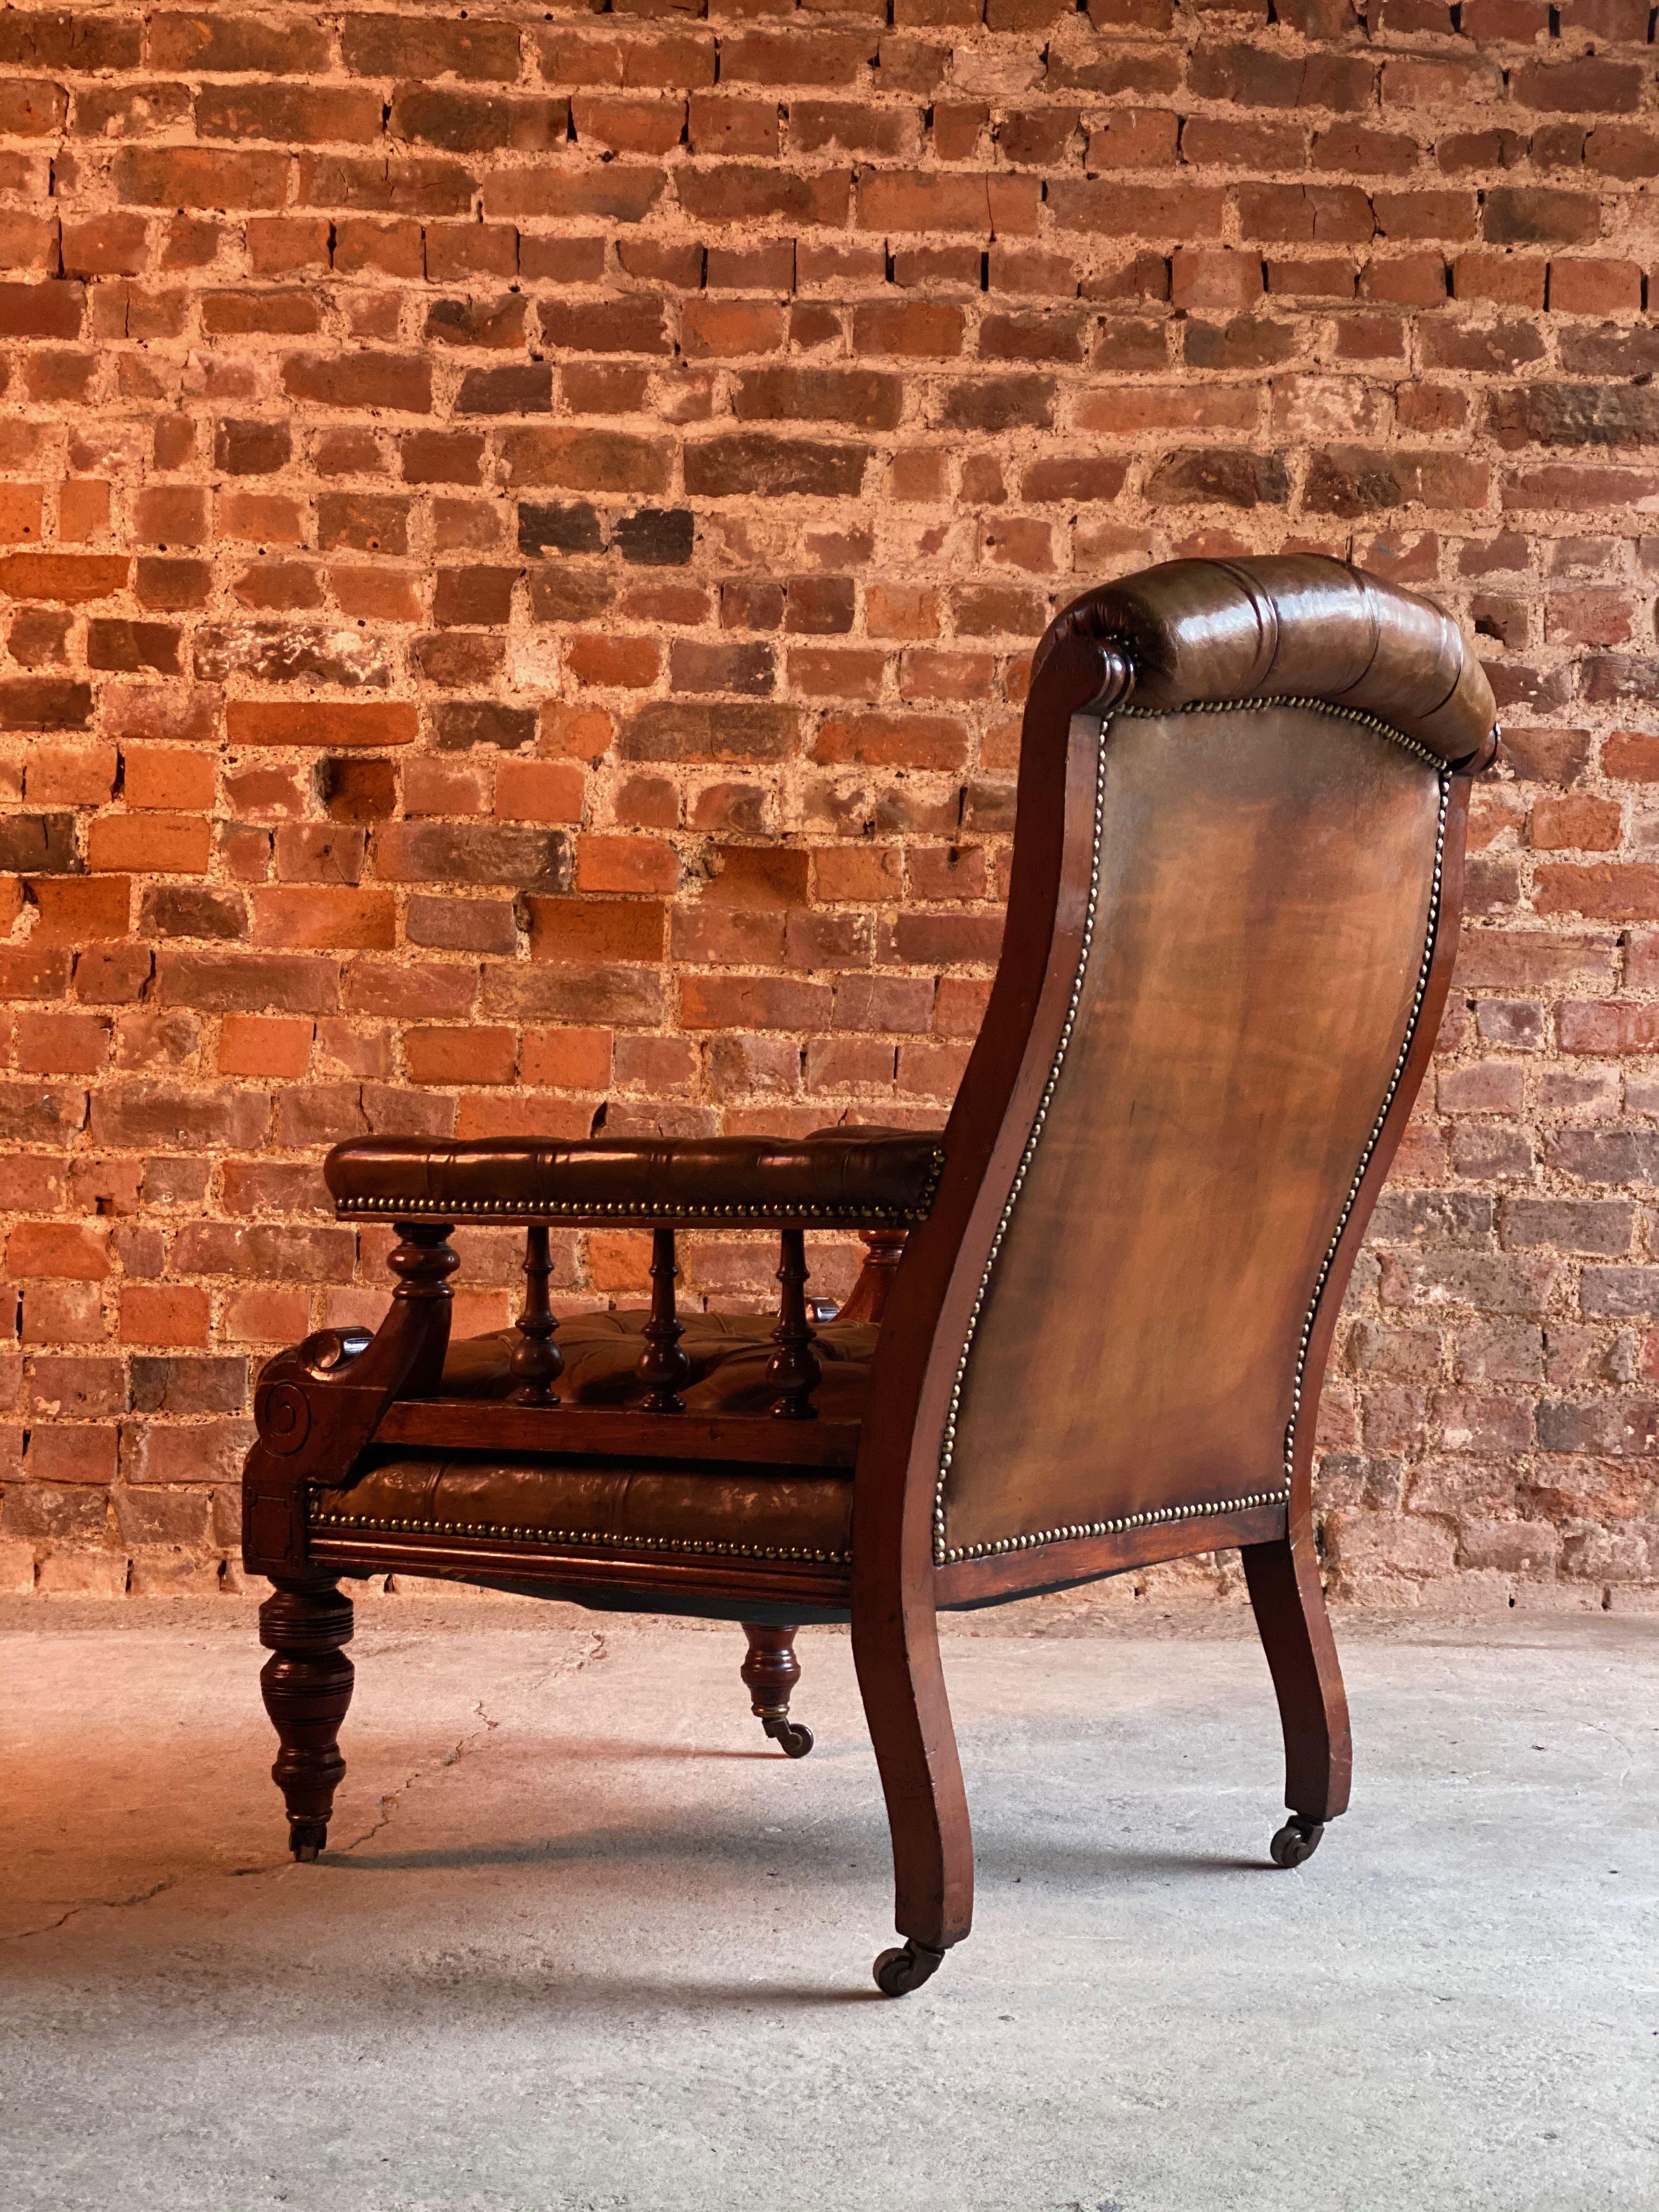 William IV mahogany buttoned back leather library chair, 19th century, circa 1835

Magnificent antique William VI mahogany & leather button back leather library chair early, 19th century, circa 1835, The chair with its beautiful aged brown leather